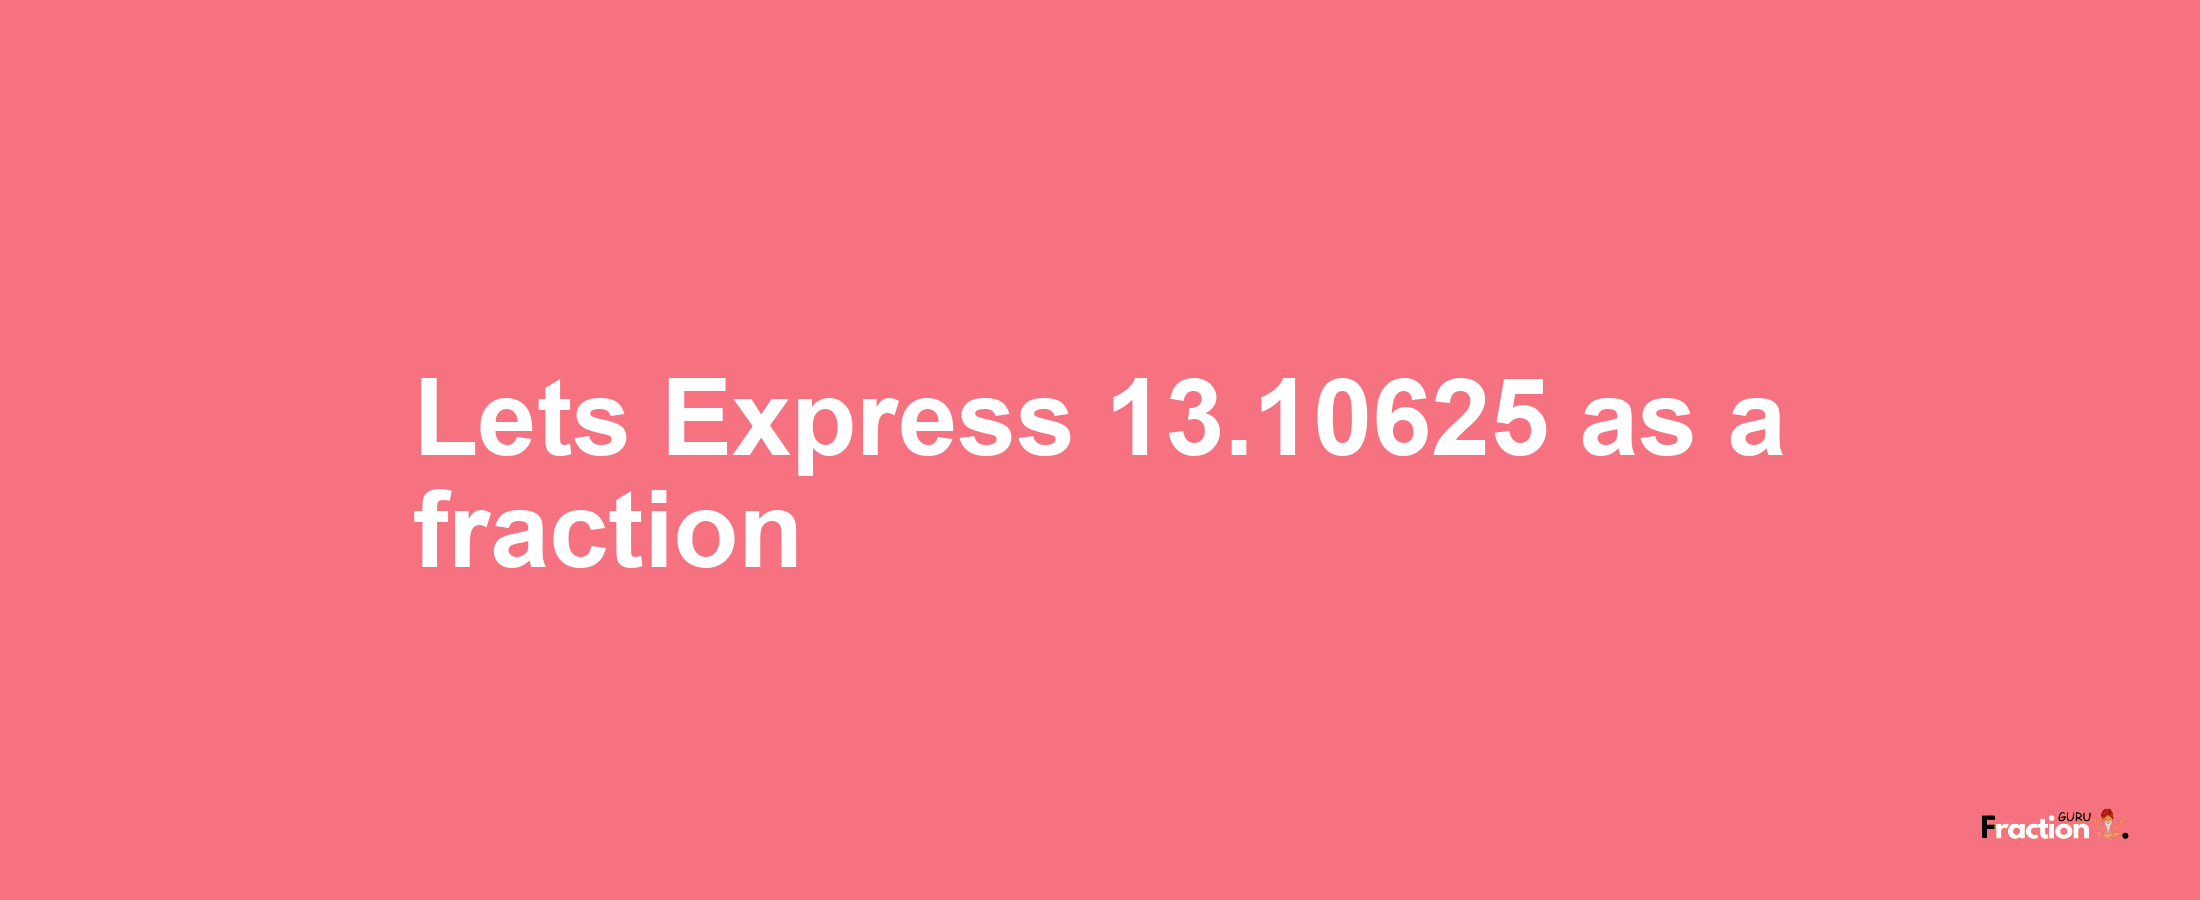 Lets Express 13.10625 as afraction